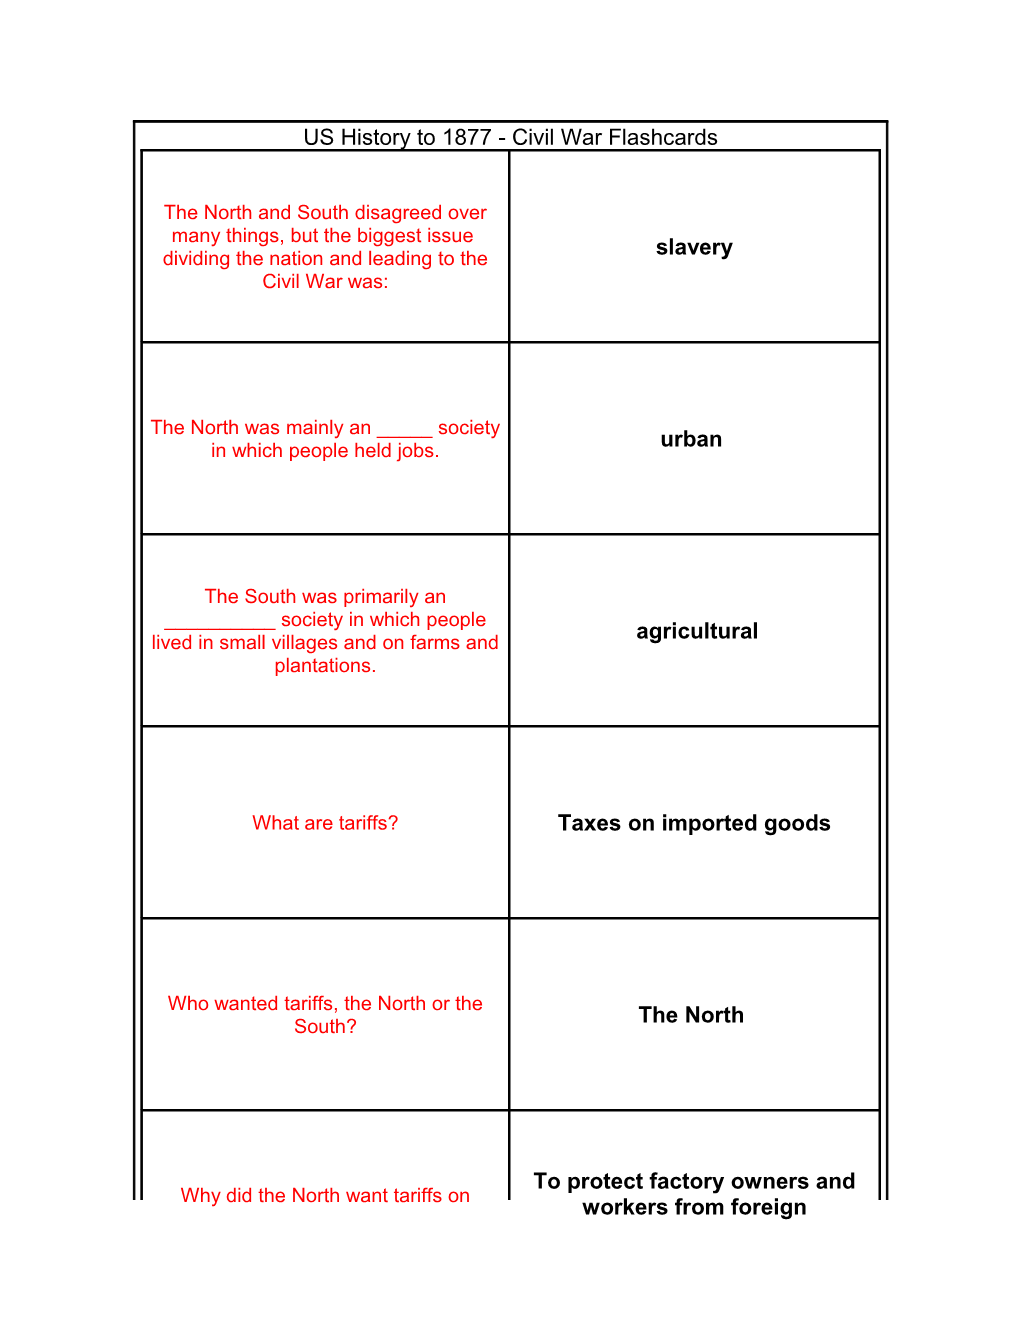 US History To 1877 - Civil War Flashcards